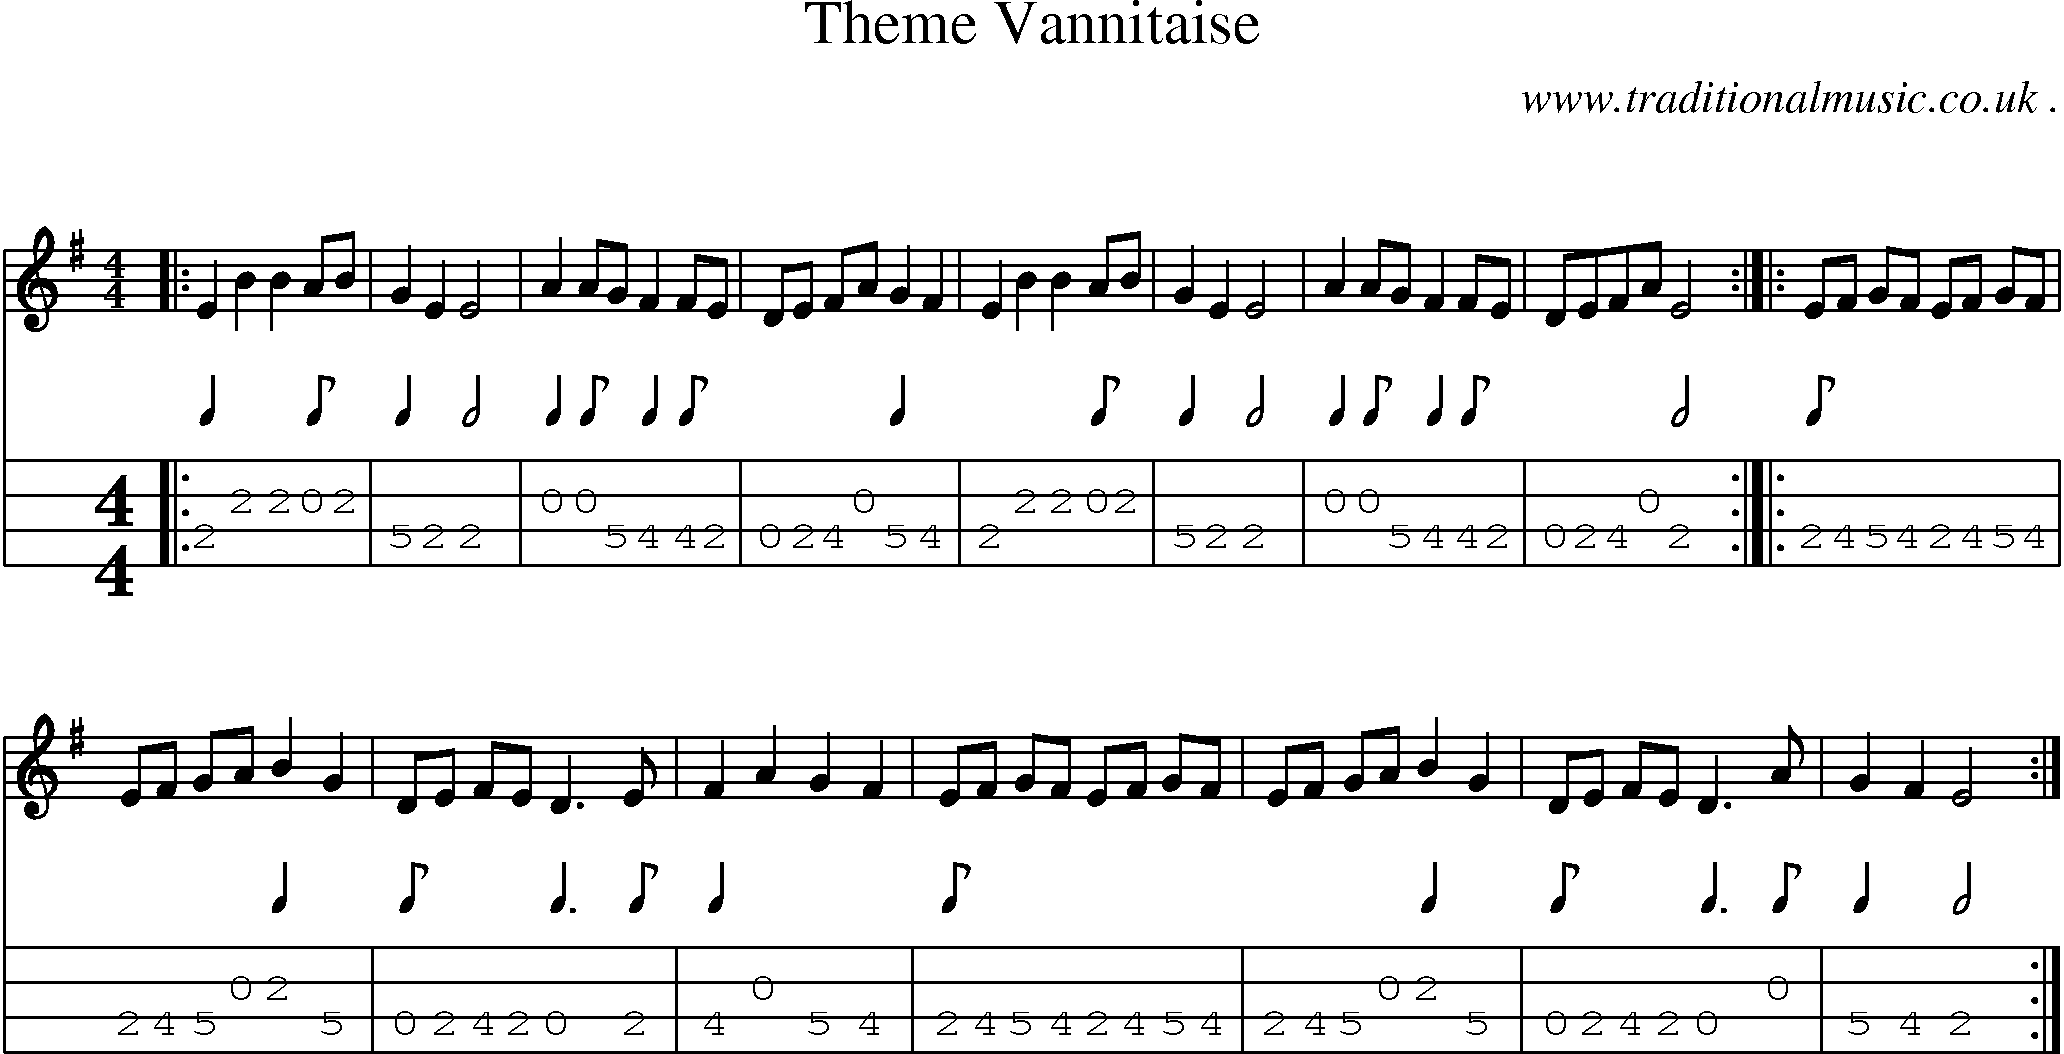 Sheet-Music and Mandolin Tabs for Theme Vannitaise